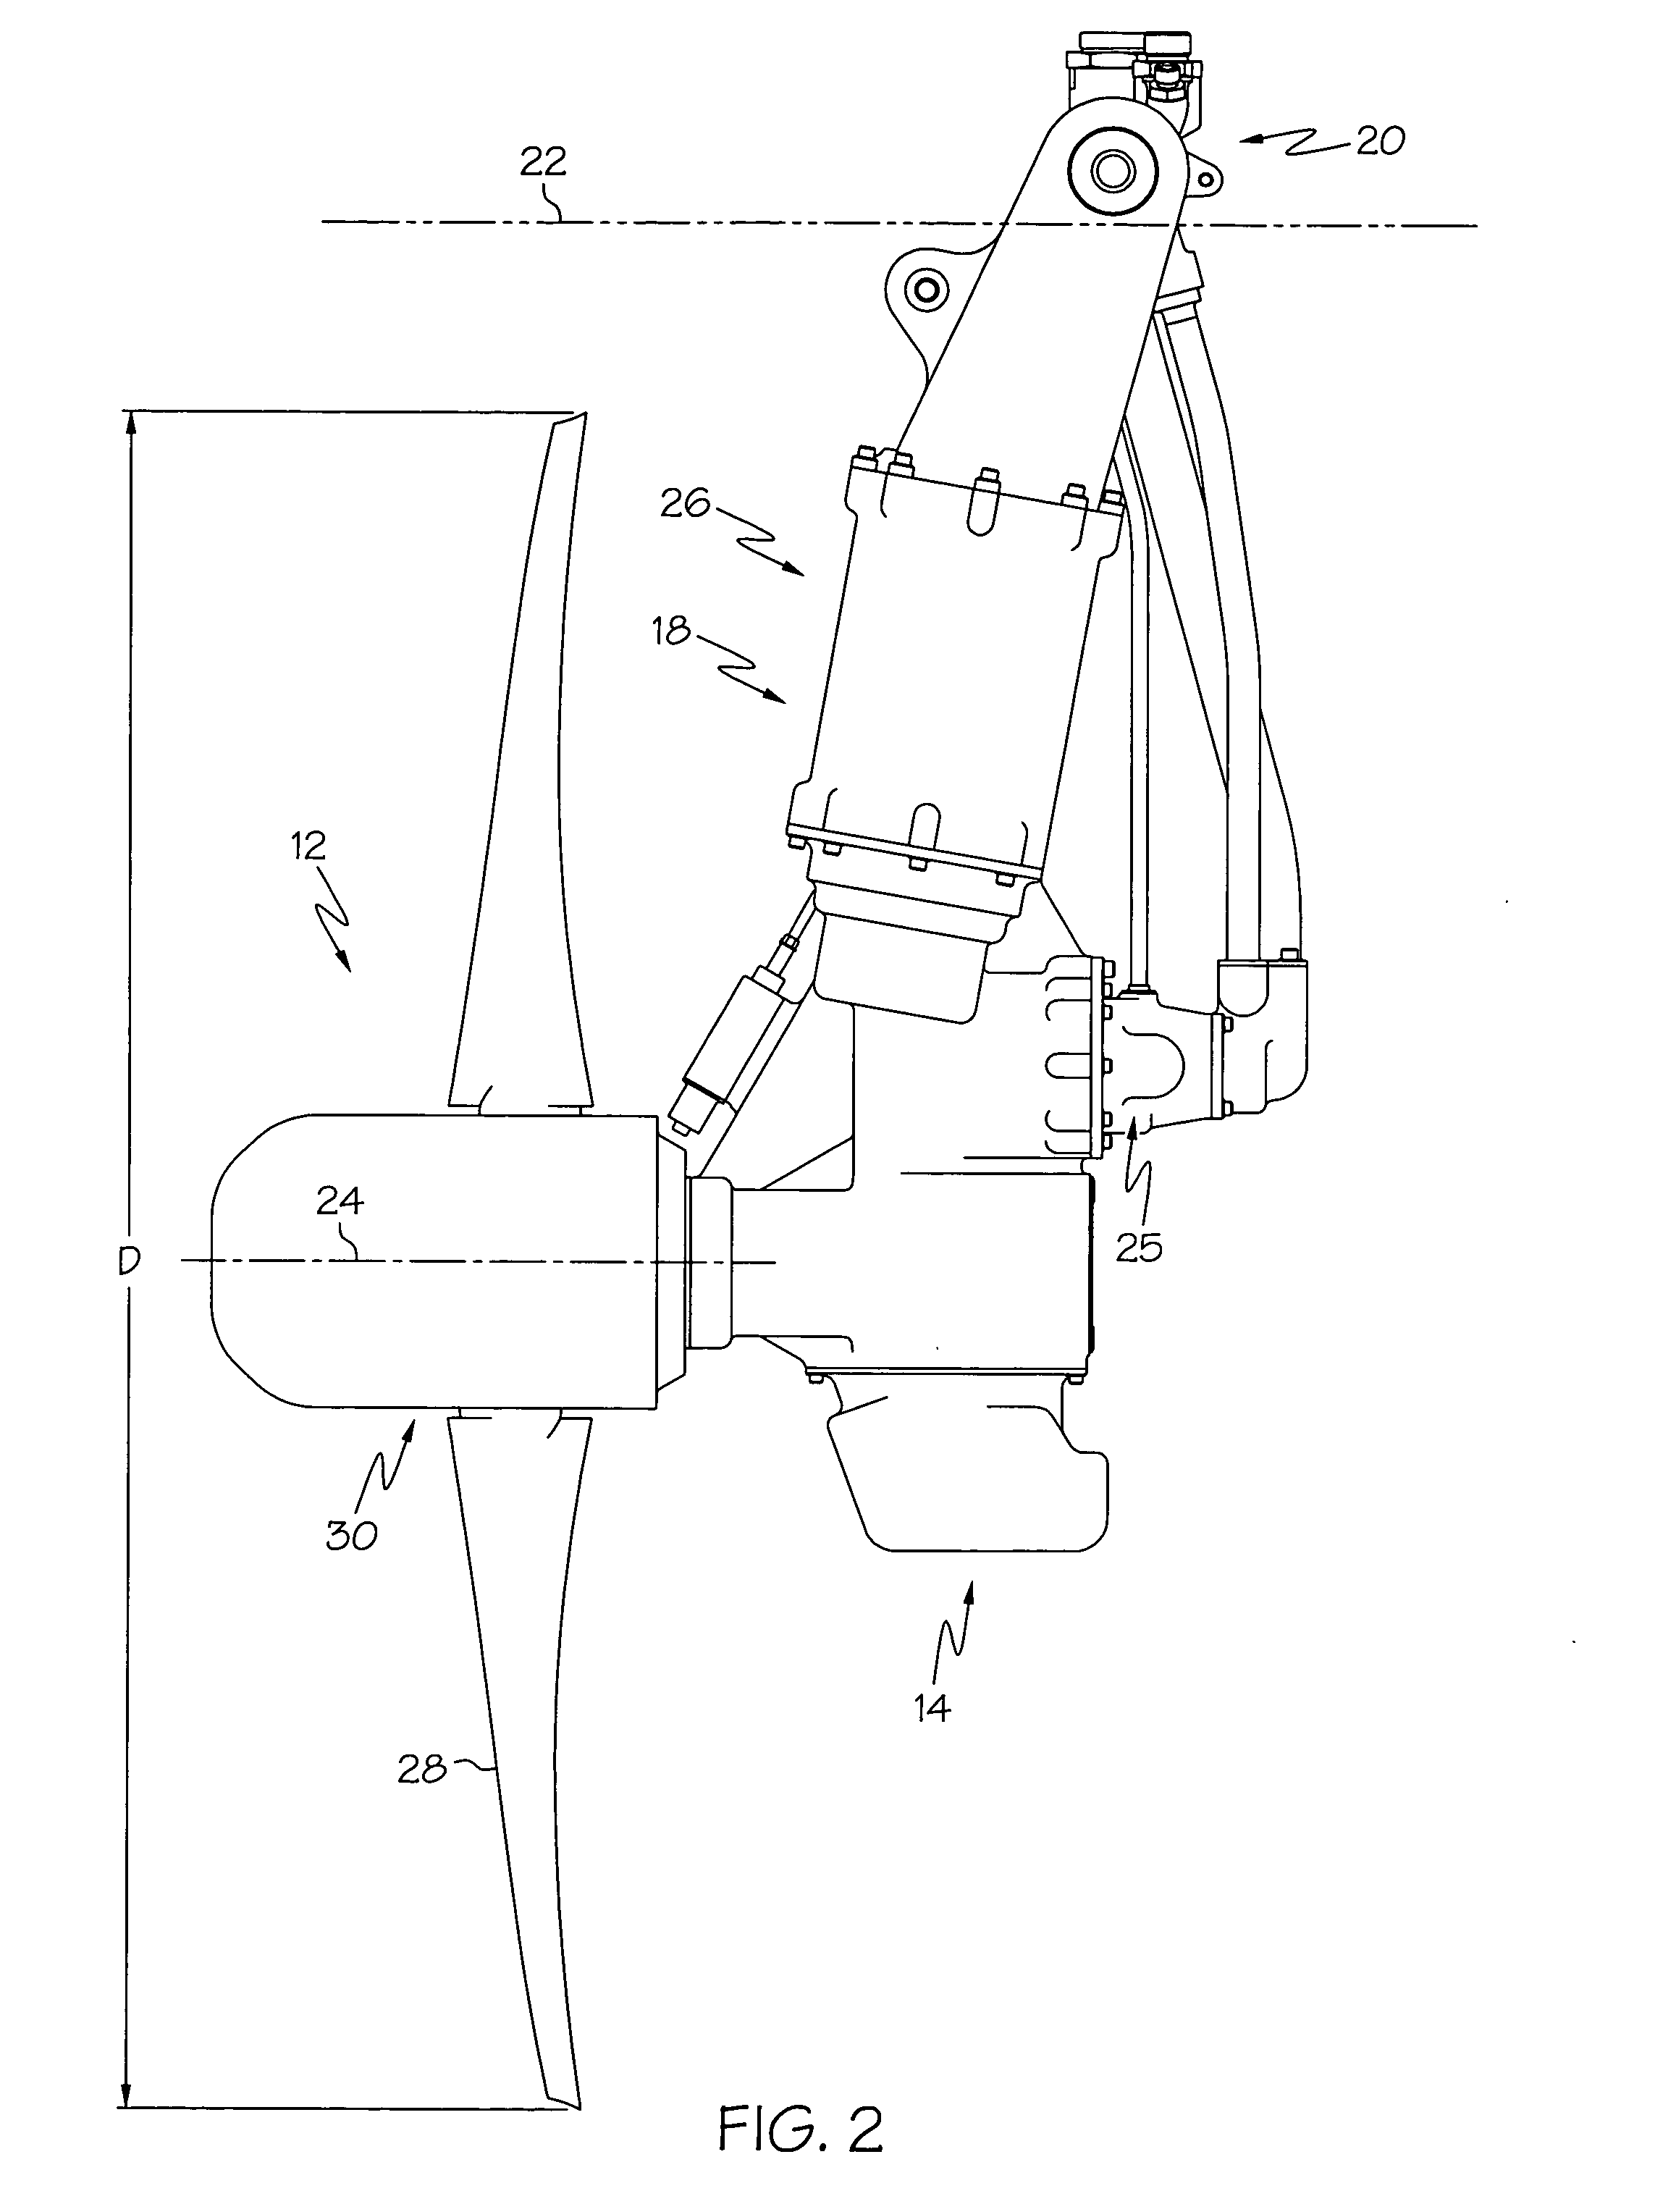 Ram air turbine with compound geartrain gearbox